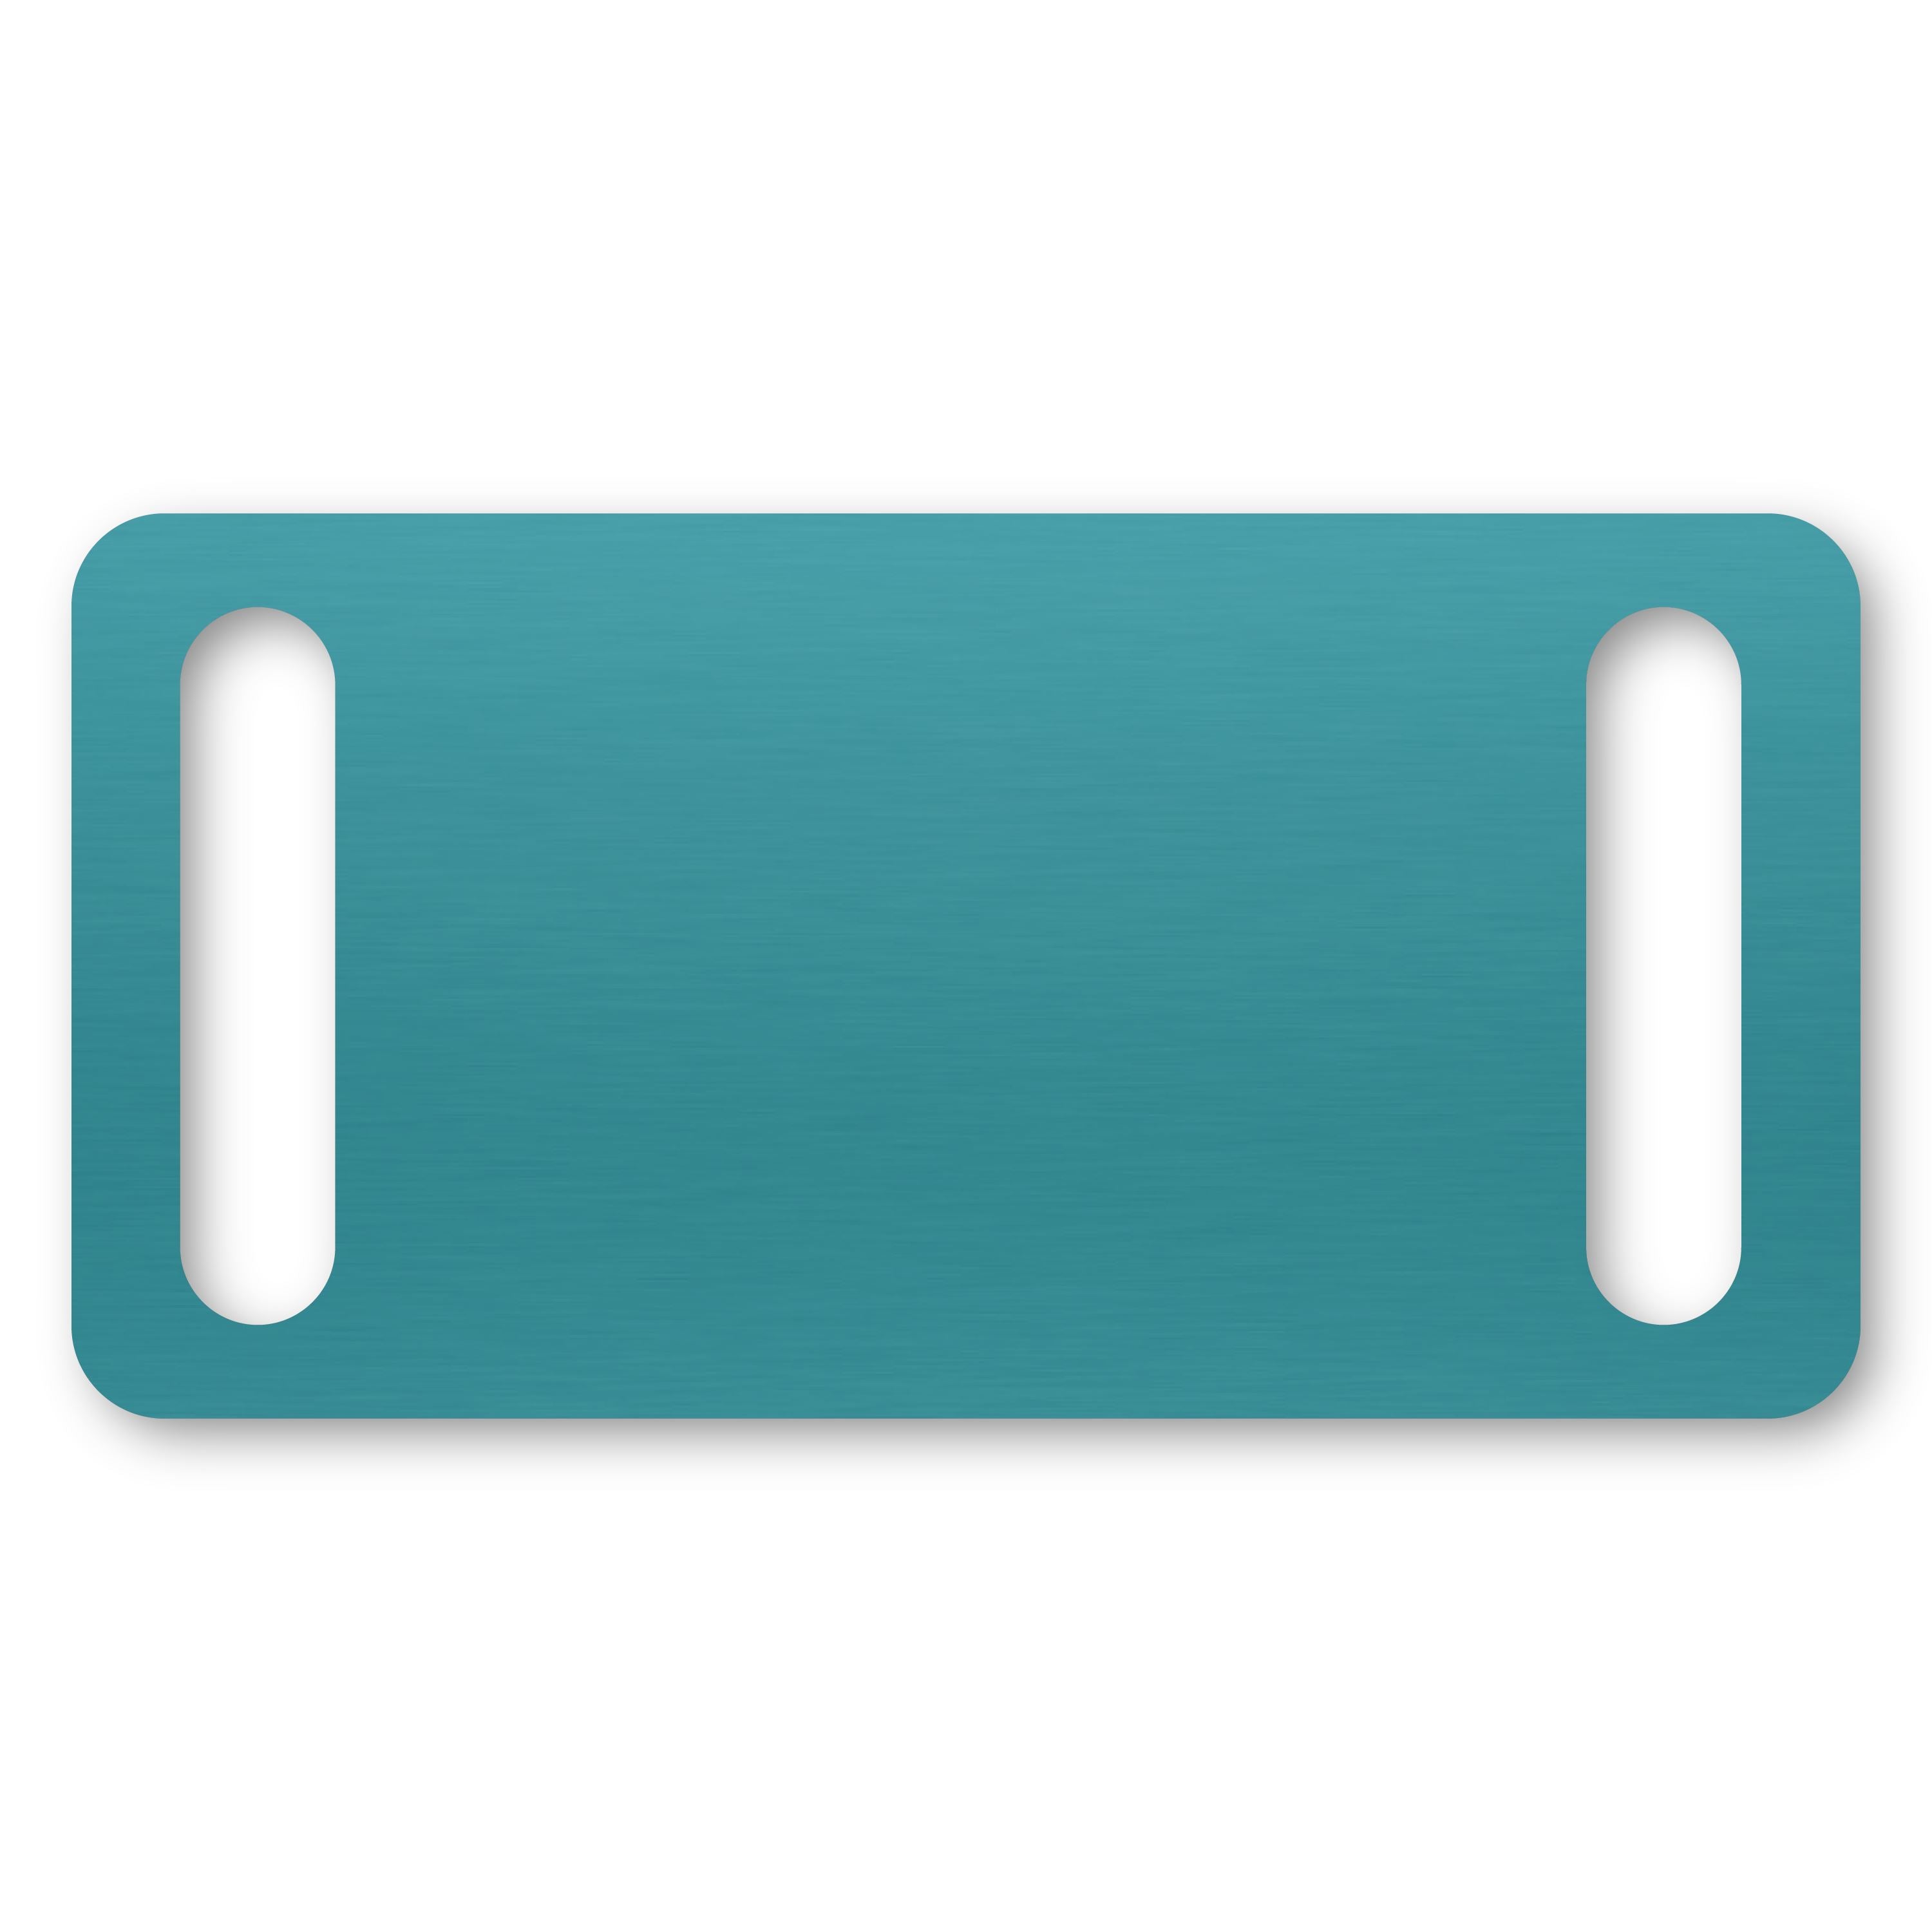 Anodized Aluminum Rectangle Slide-On Tags, 7/8" x 1-3/4" with 5/32" x 3/4" Slot, Laser Engraved Metal Tags Craftworks NW Turquoise 